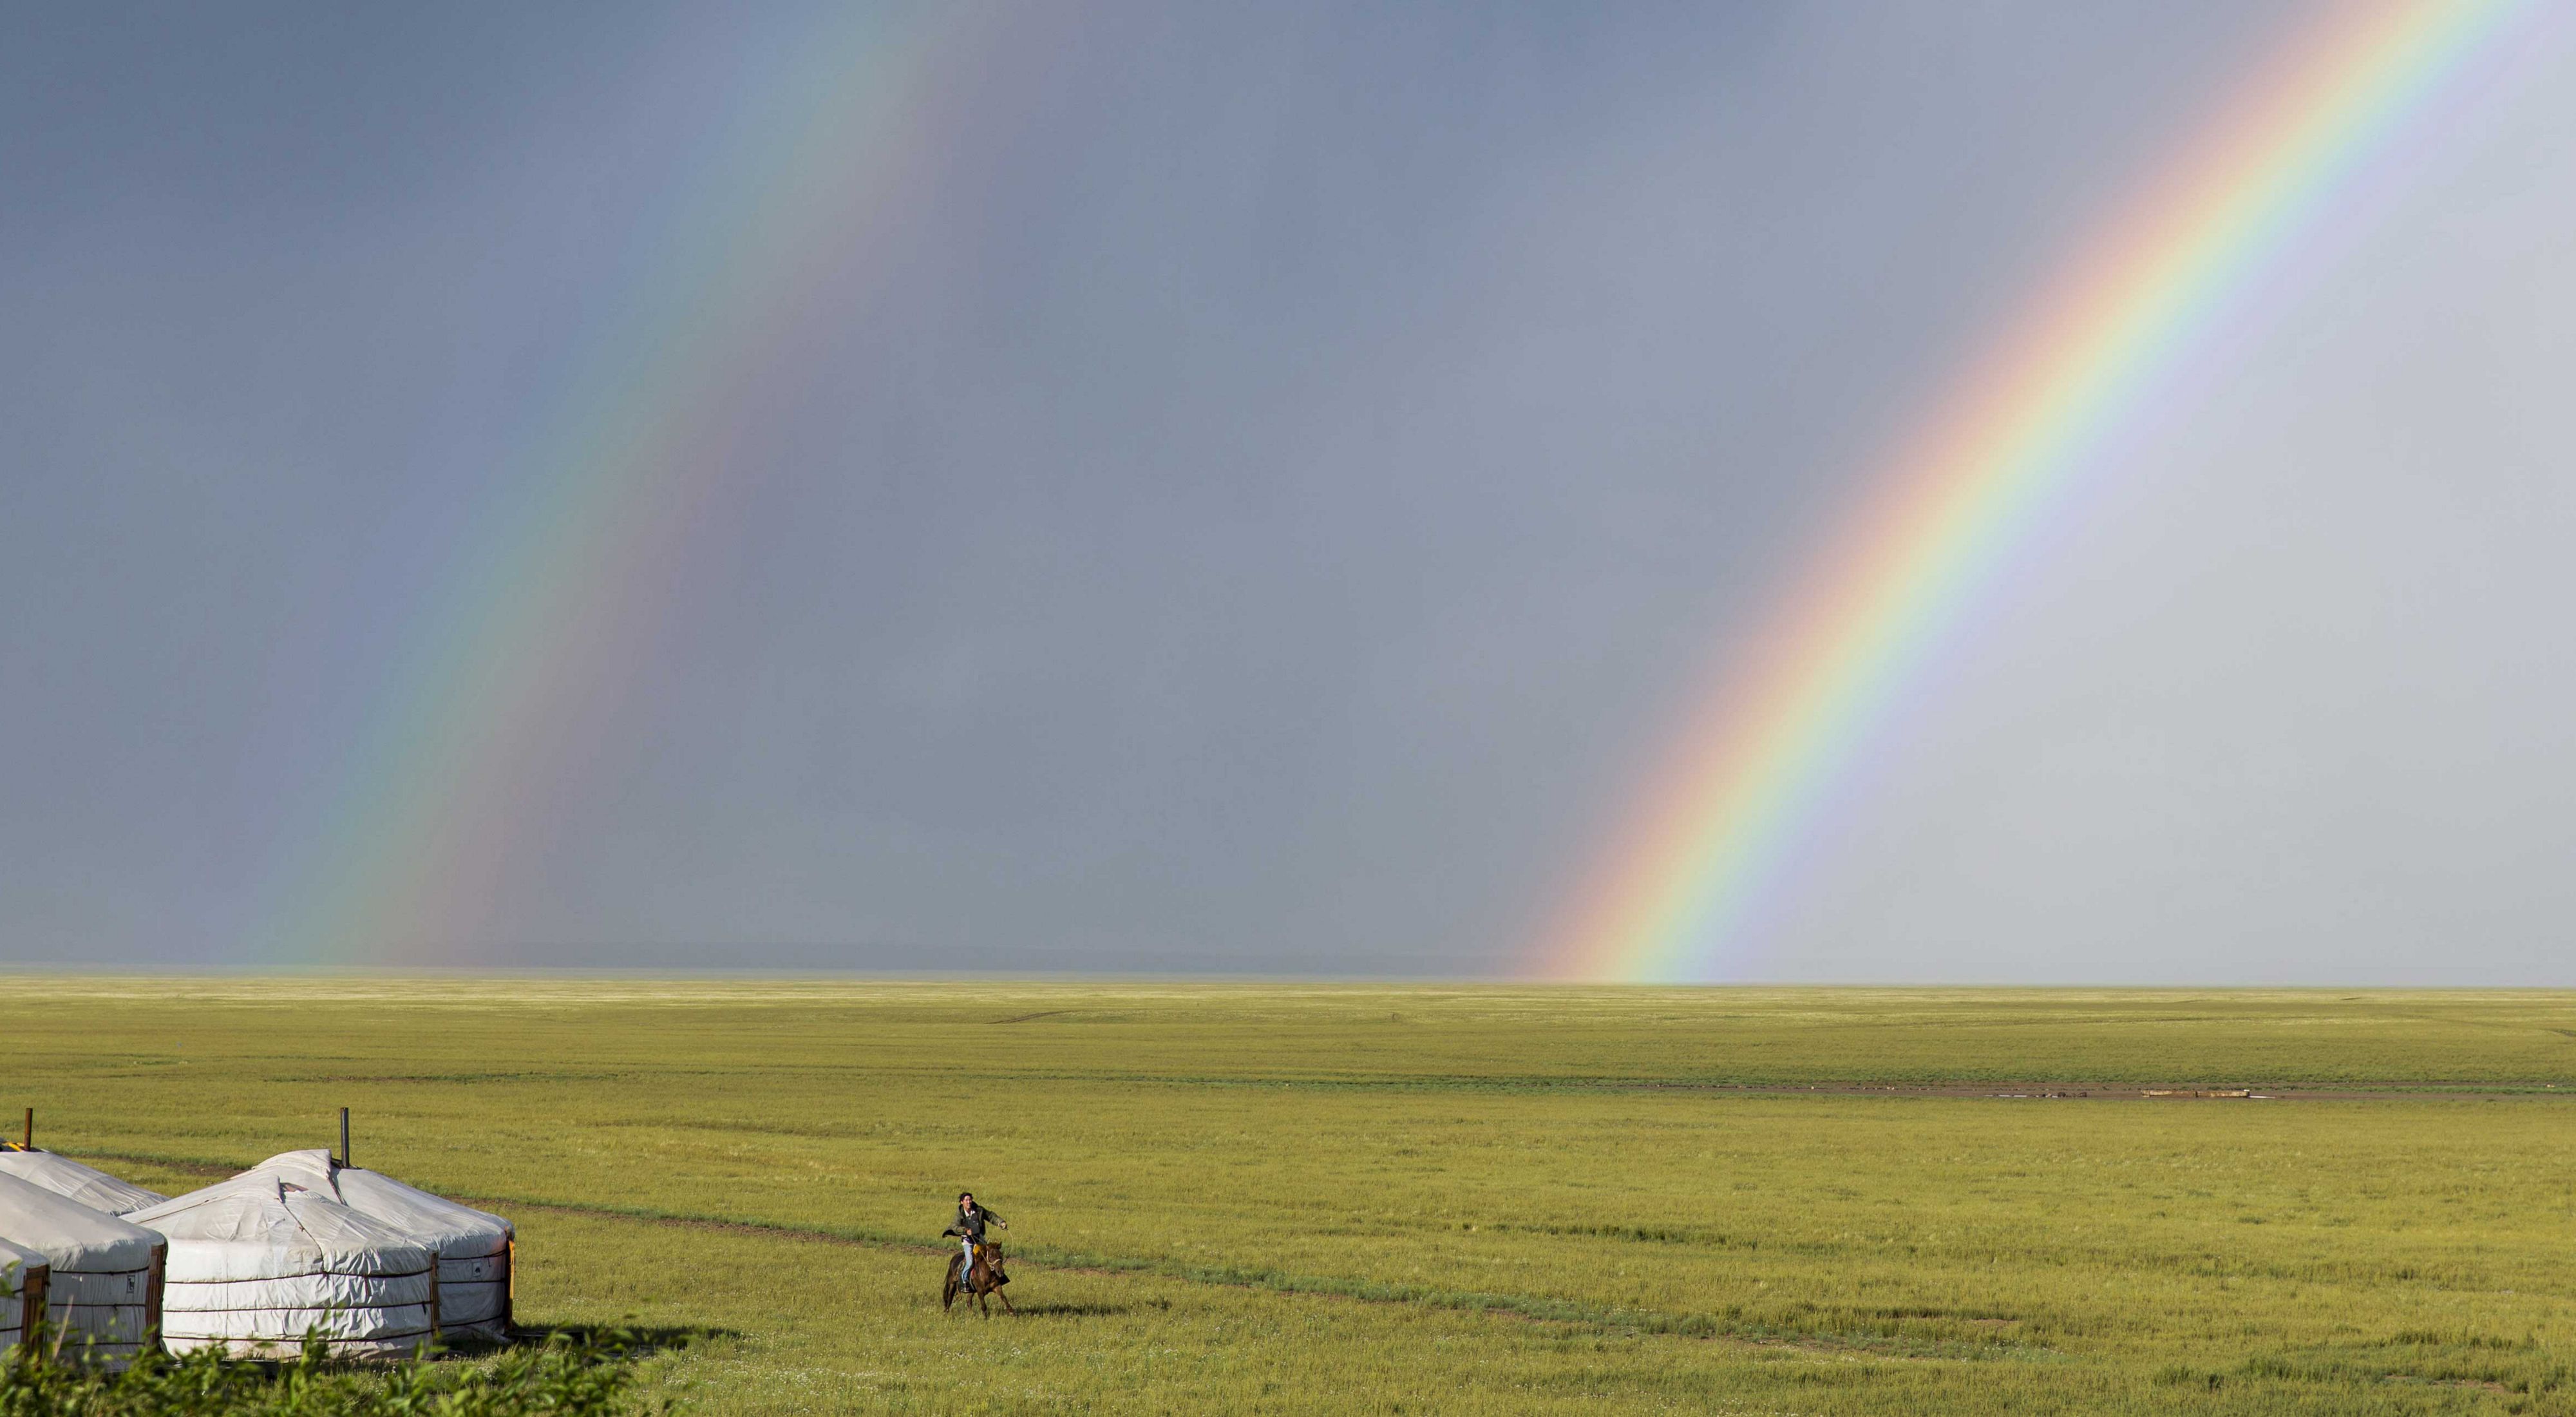 past gers and a double rainbow in the South Gobi Desert, Mongolia.